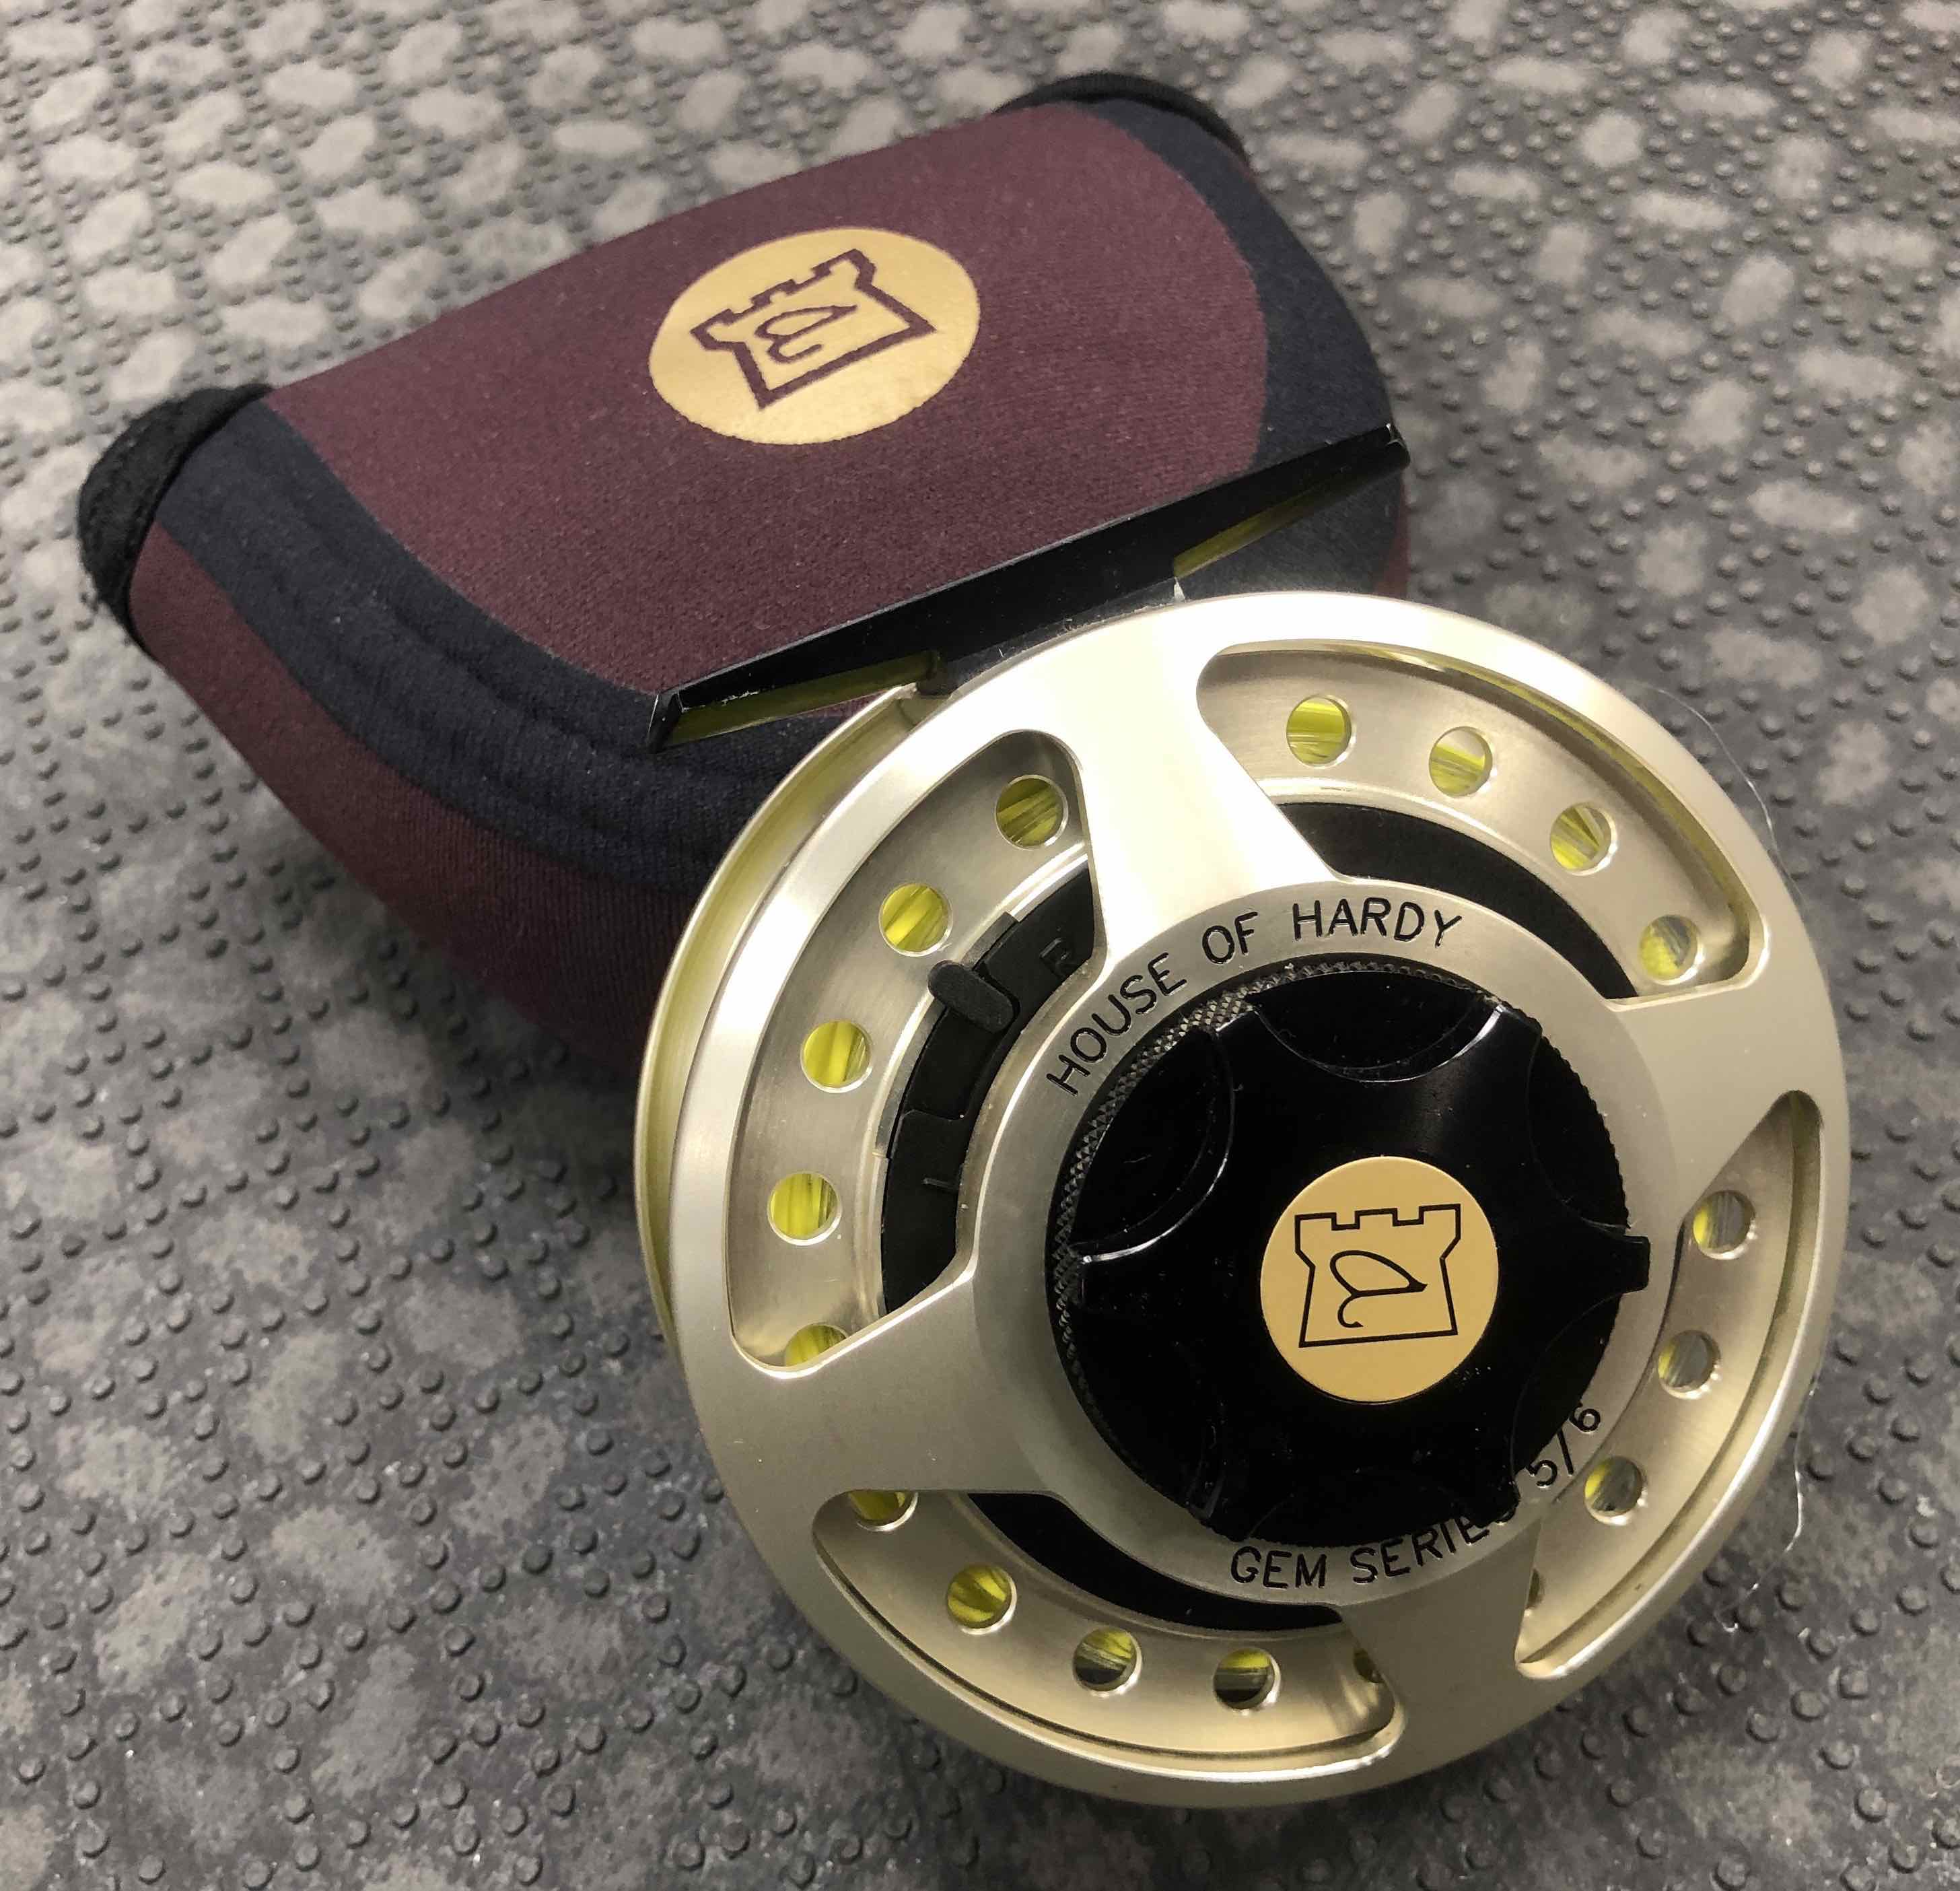 SOLD! – NEW PRICE! – House of Hardy – Gem Series Fly Reel – Size 5